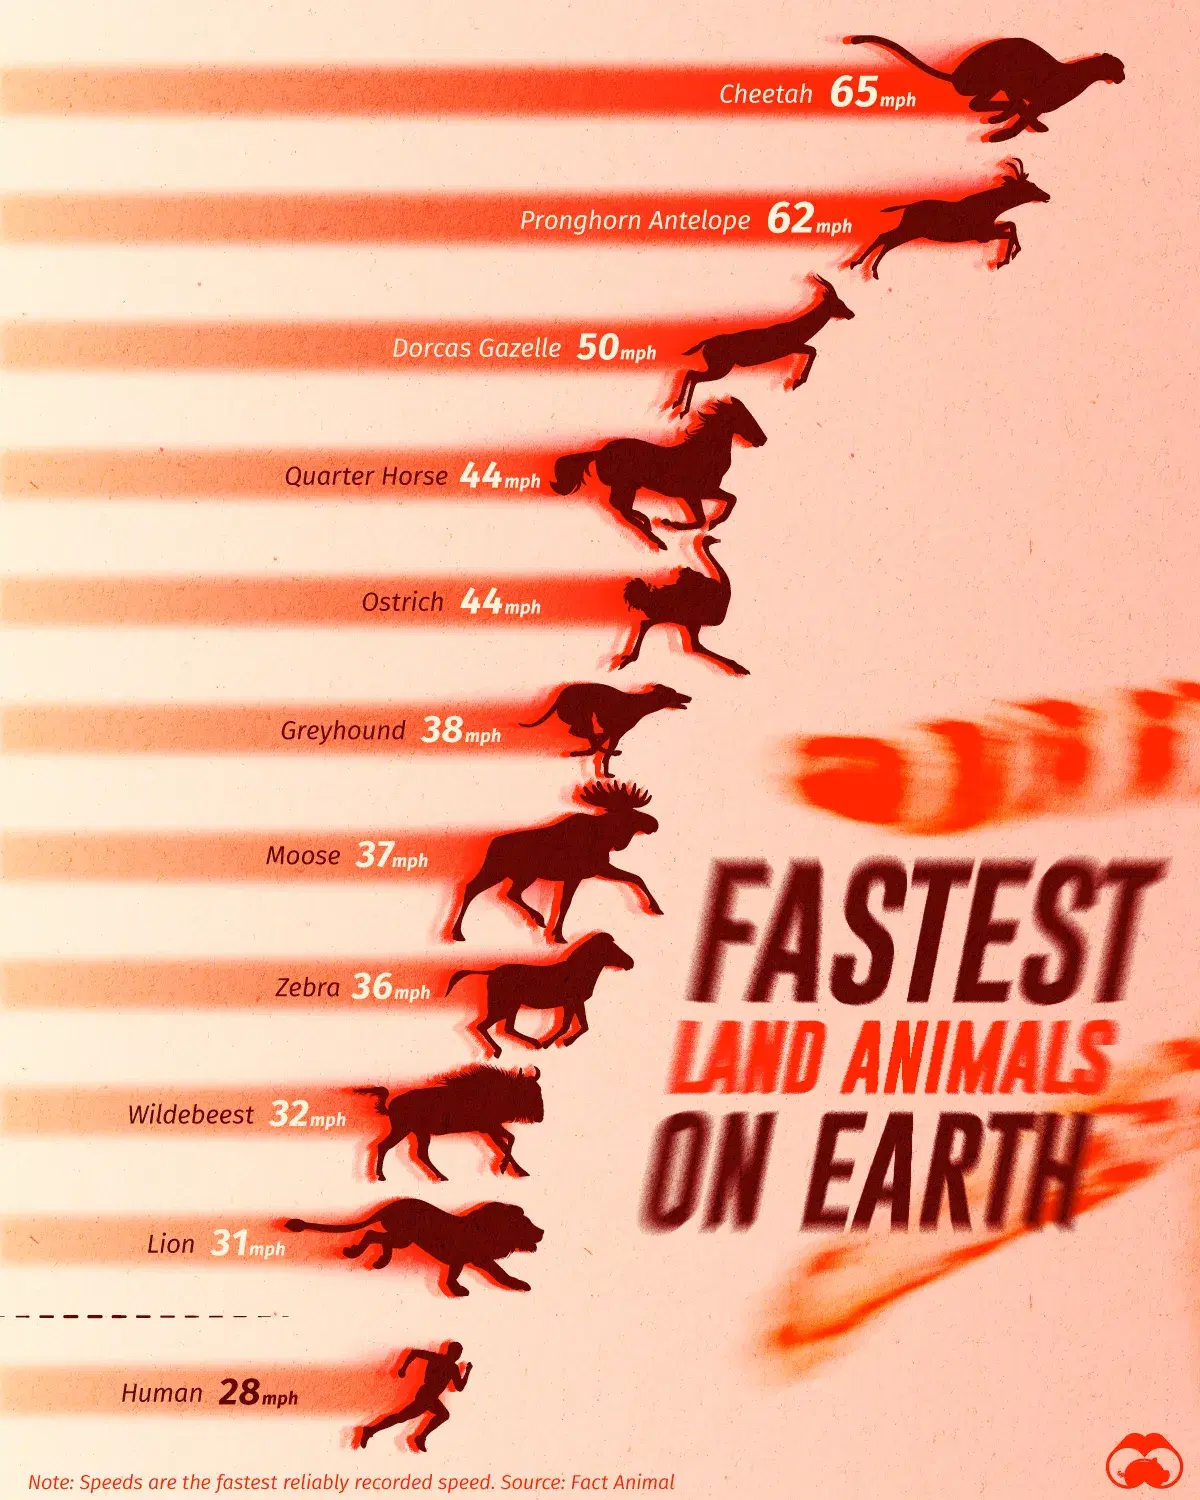 The Fastest Land Animals on the Planet